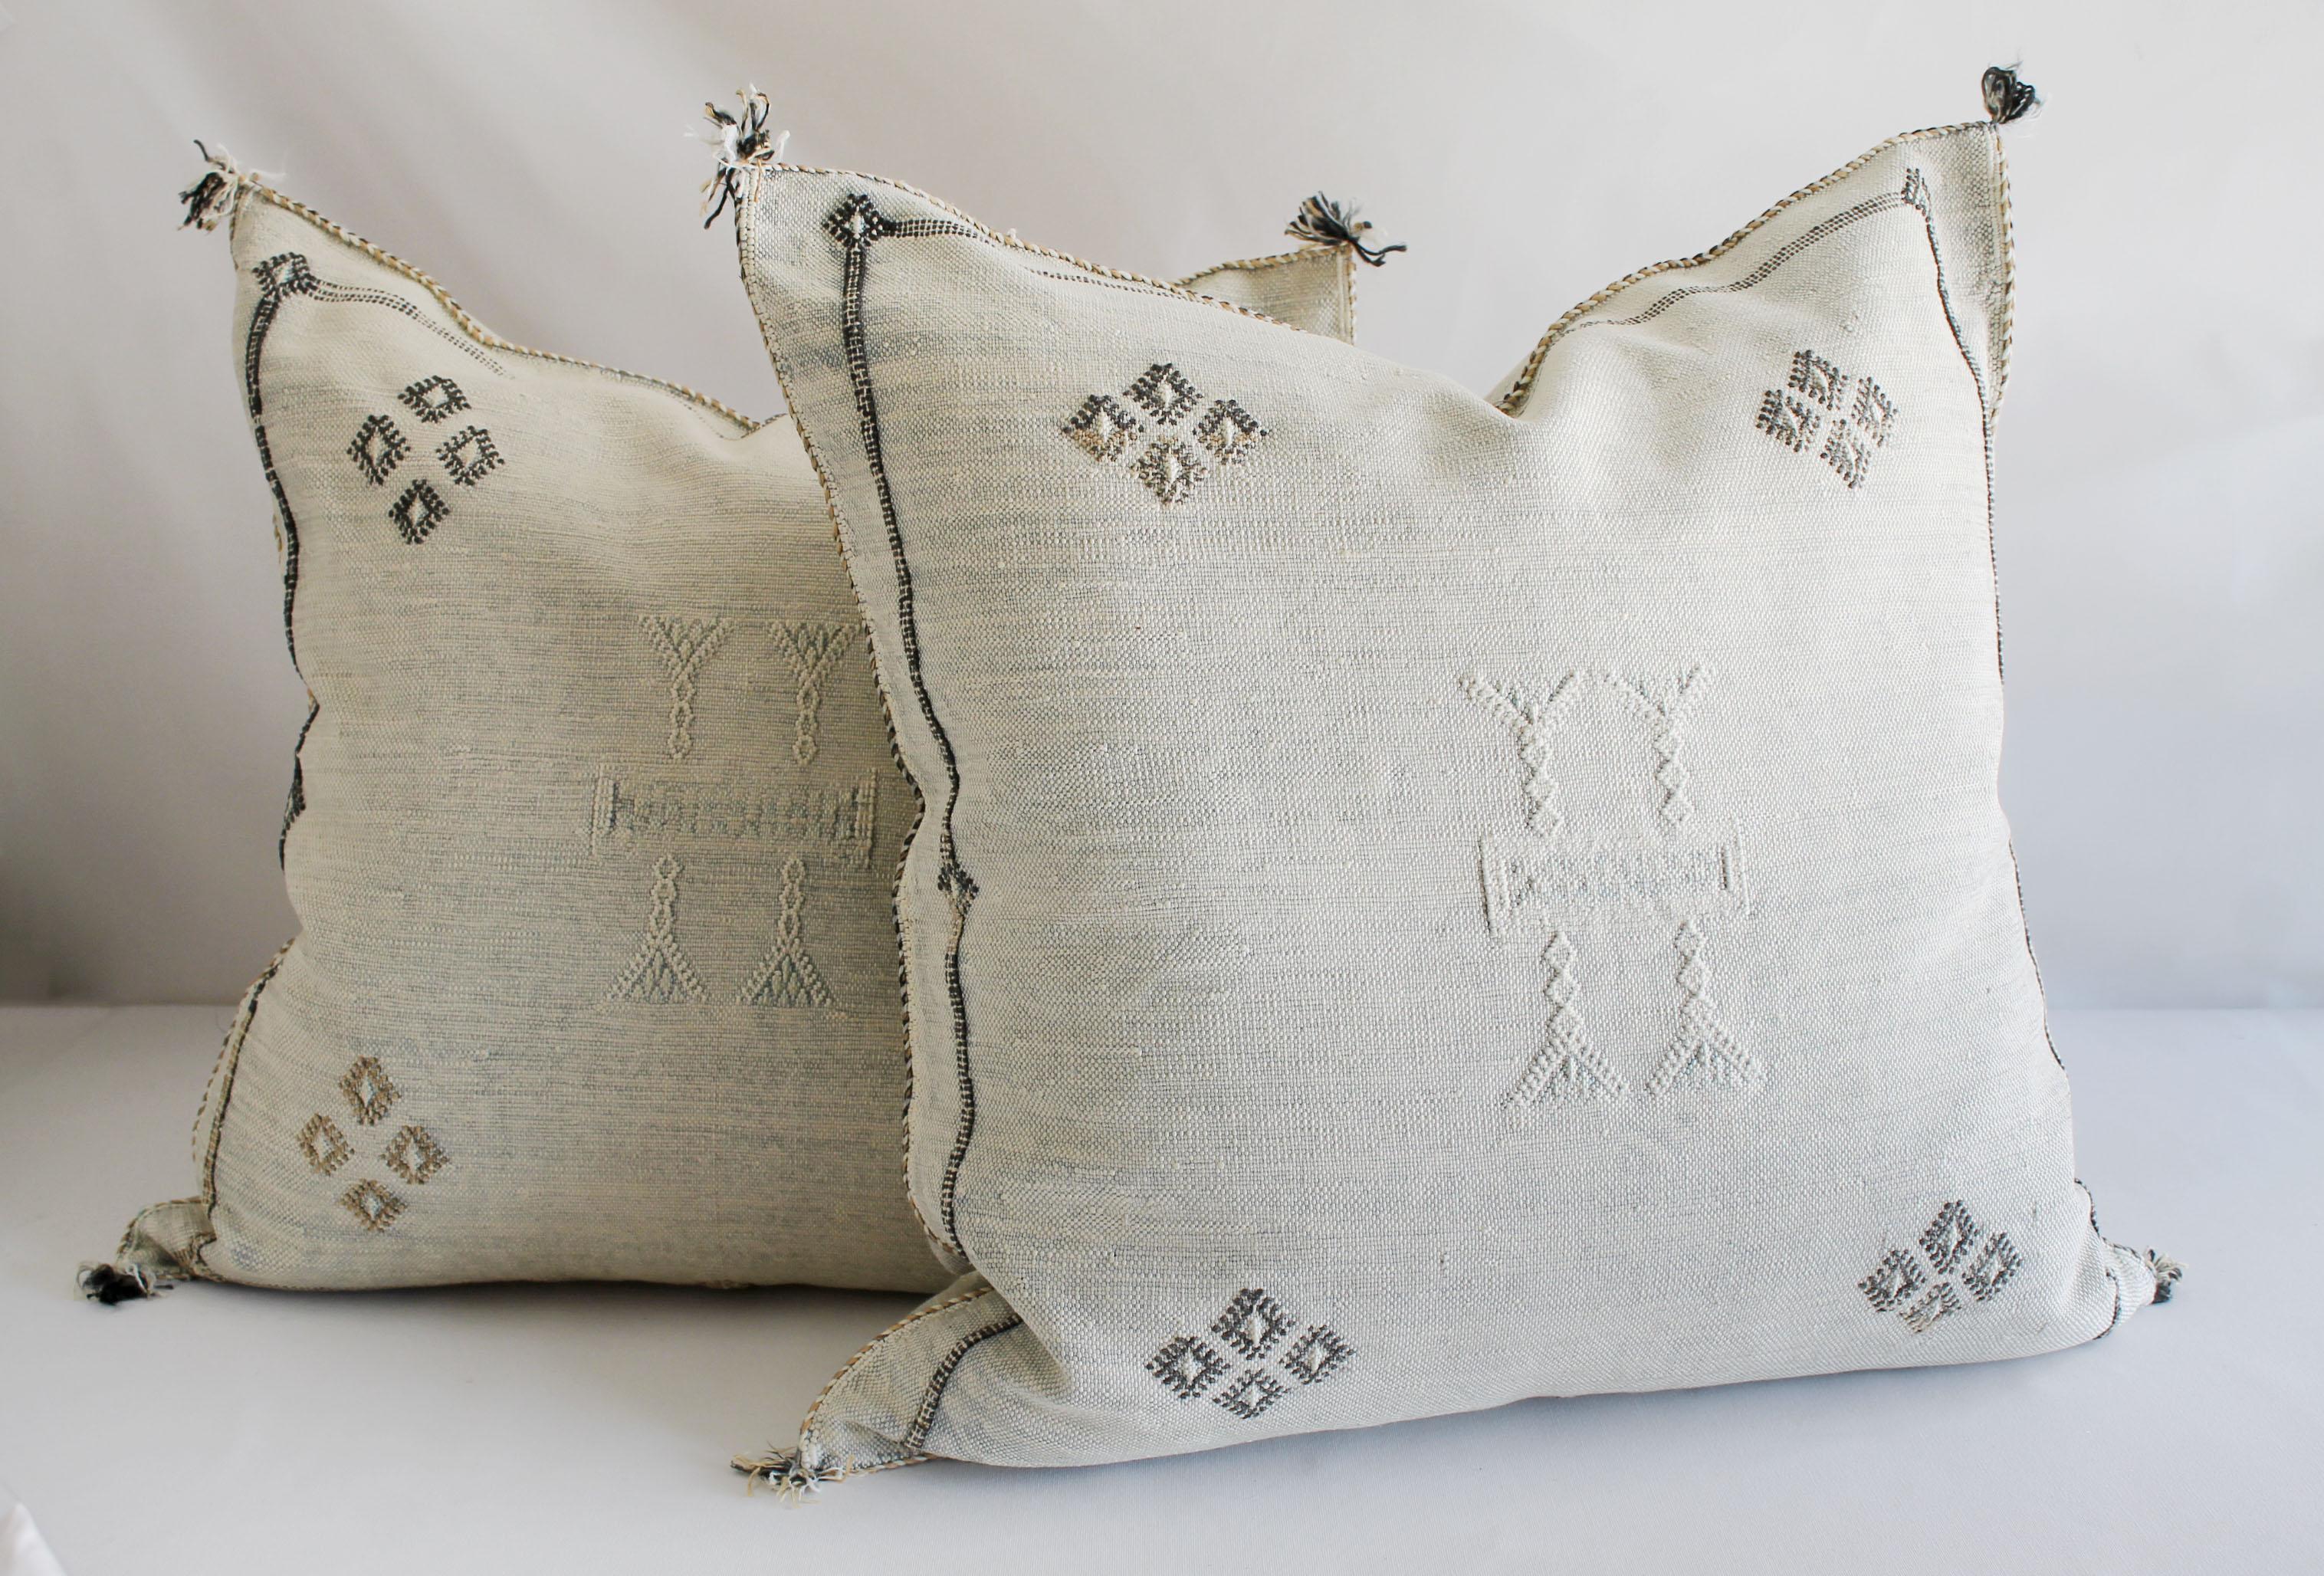 Moroccan handwoven cactus silk pillow.
 As shown with a beautiful light gray tone background, and white, with dark gray and creamy tone accents. Hidden zipper closure, backside is the same plain cactus silk with no embroidery. 
Measures: 22